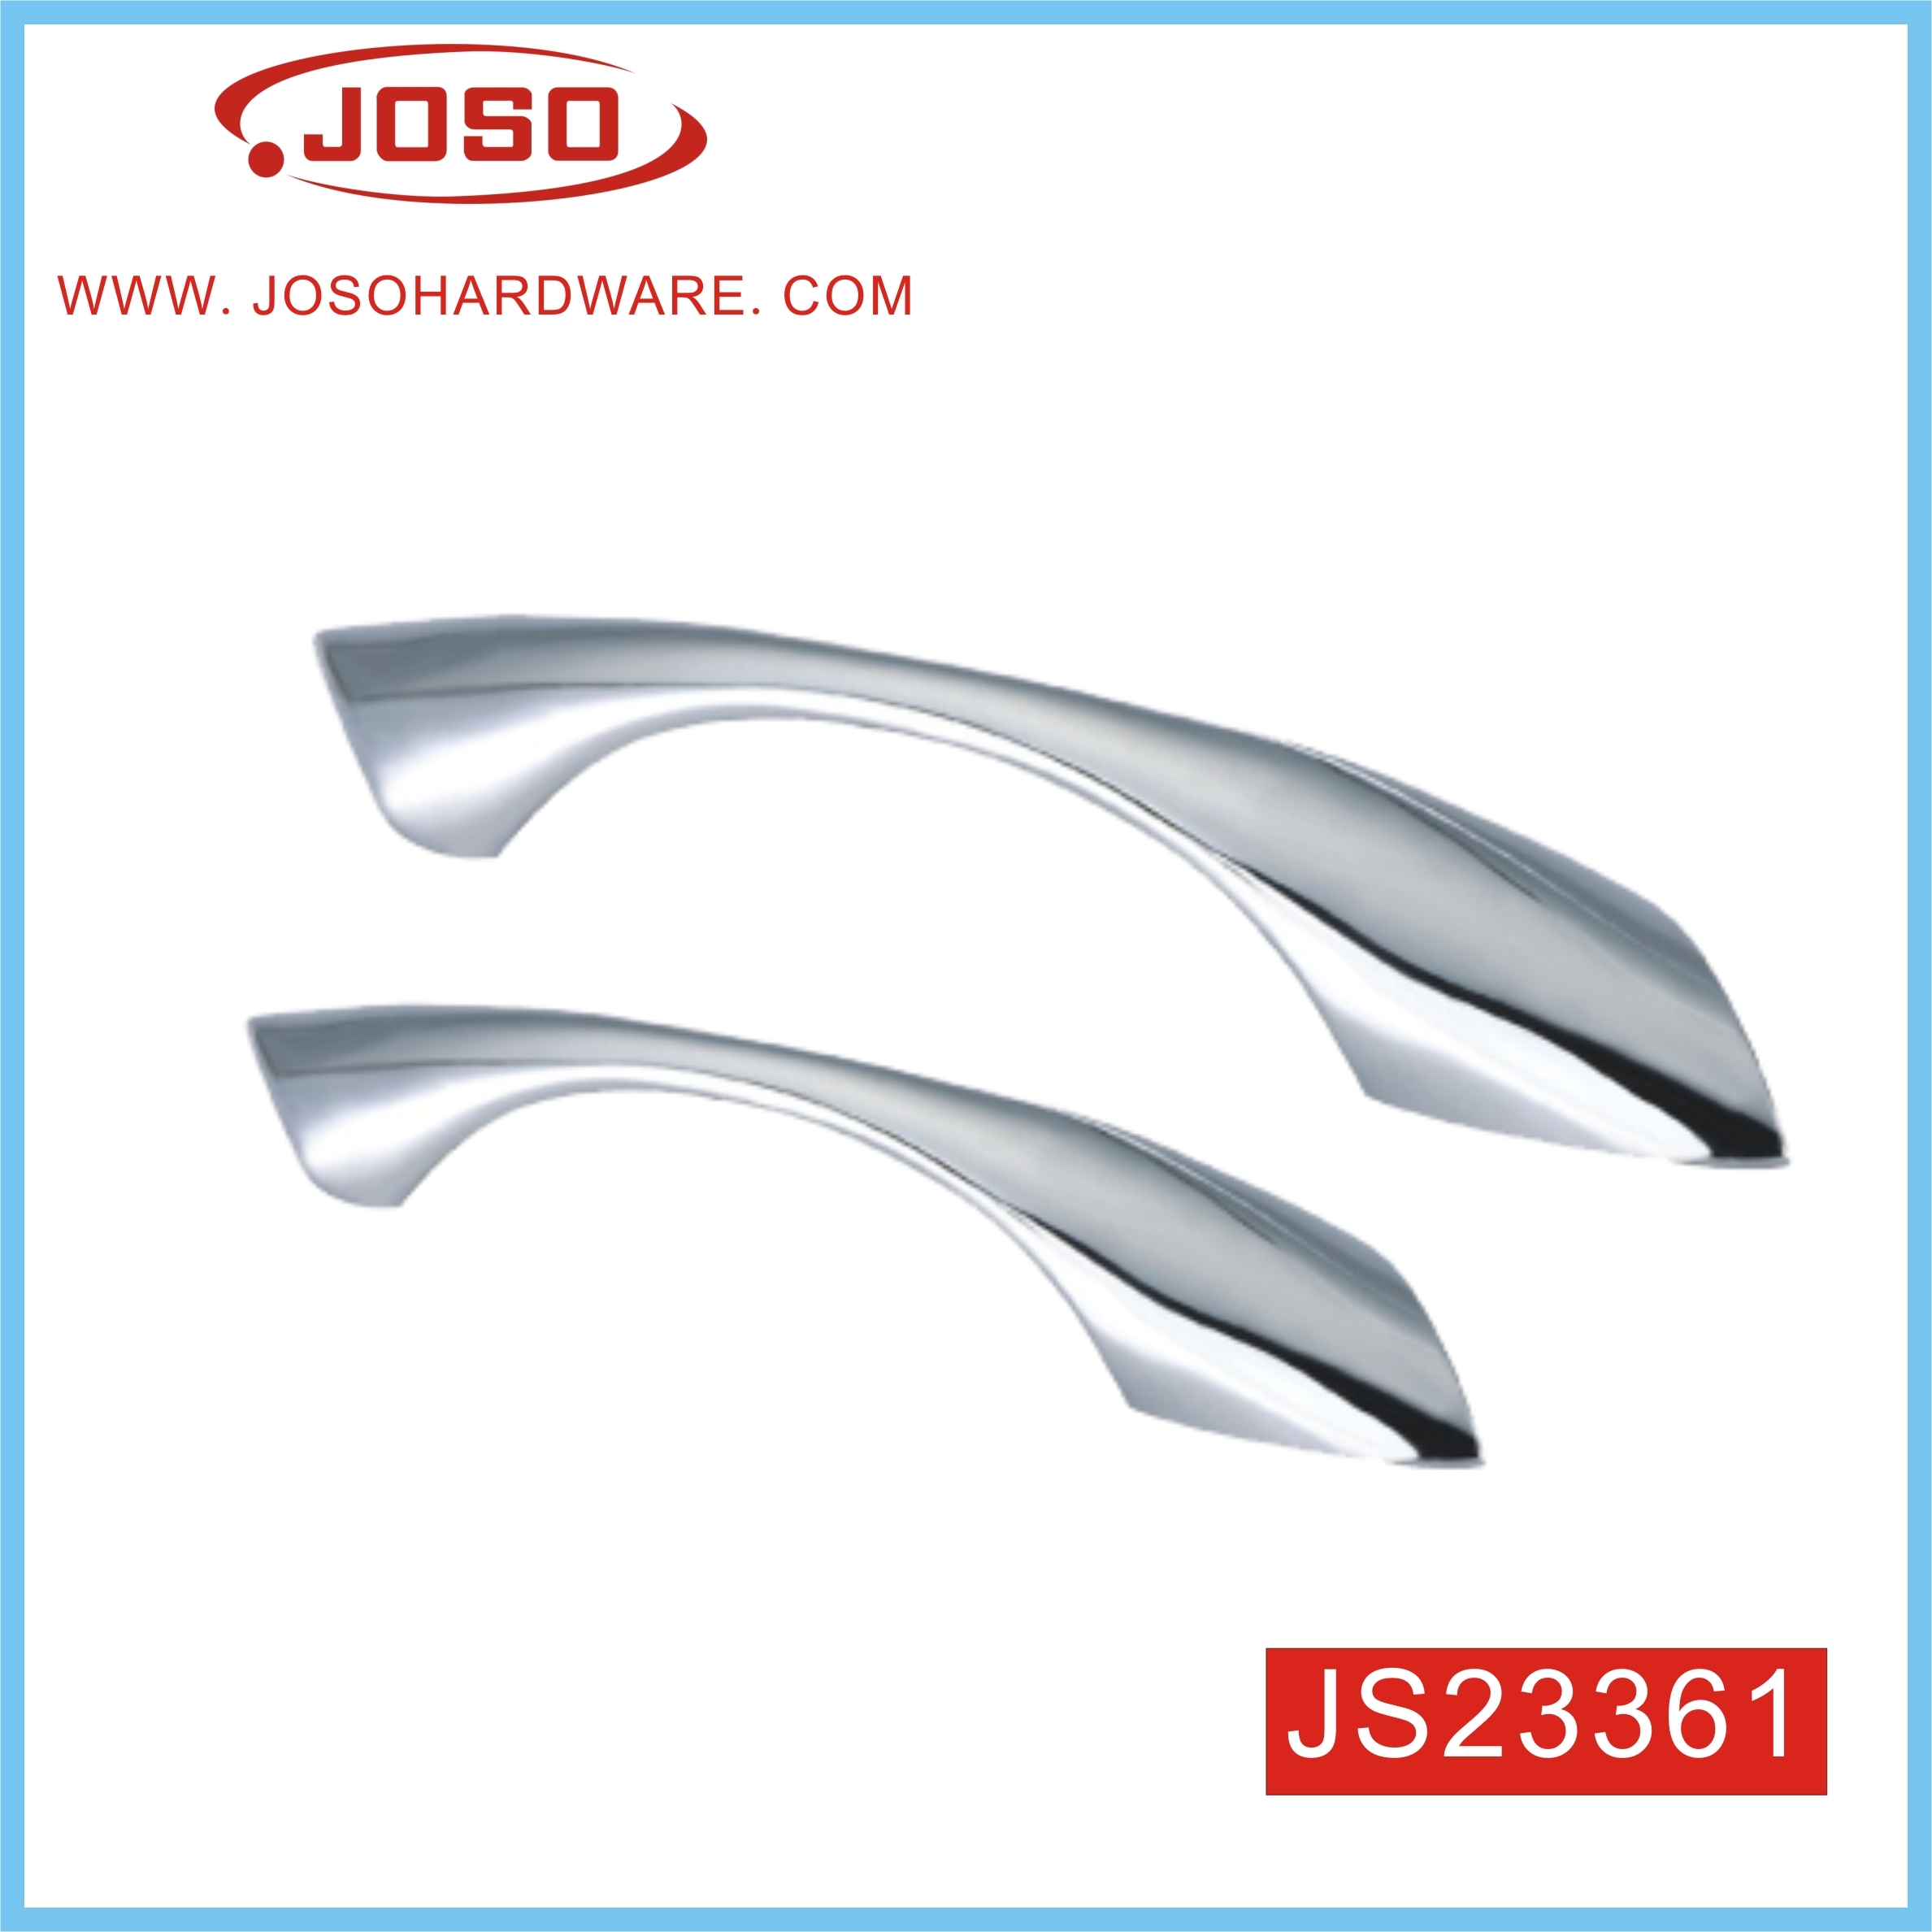 High Quality Dainty Bright Chrome Furniture Pull Handle for Drawer